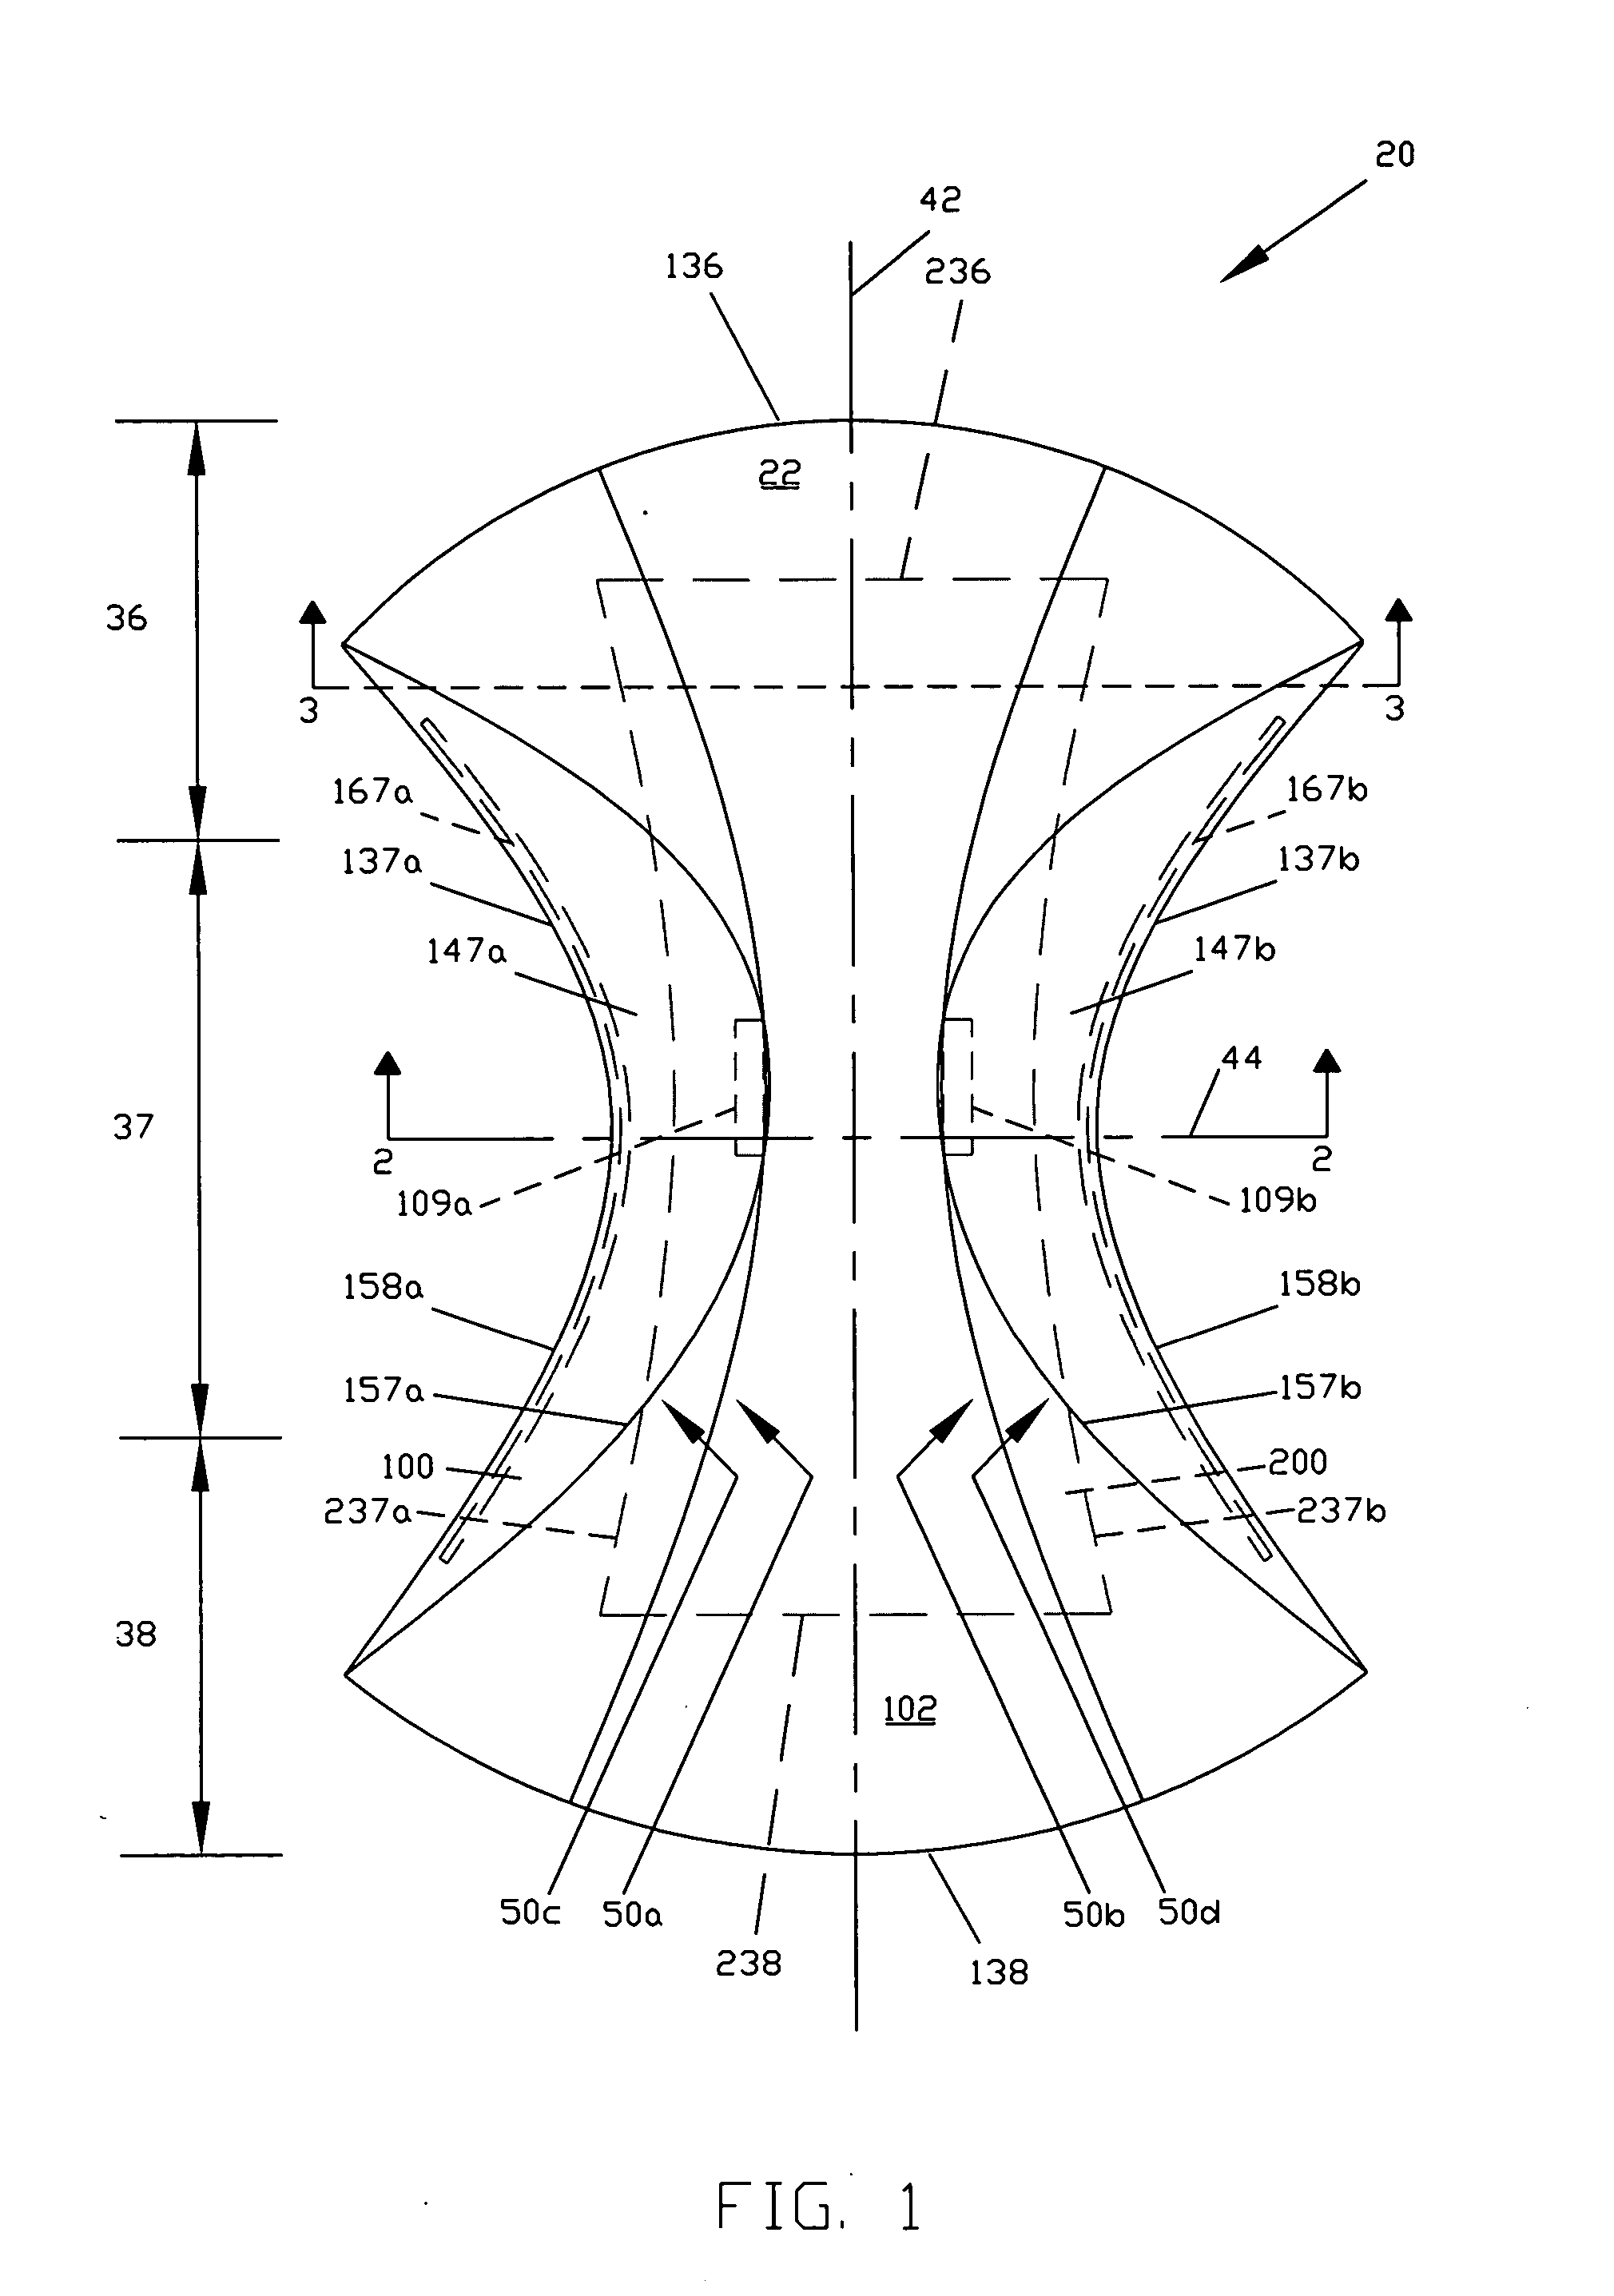 Disposable absorbent article having layered containment pockets